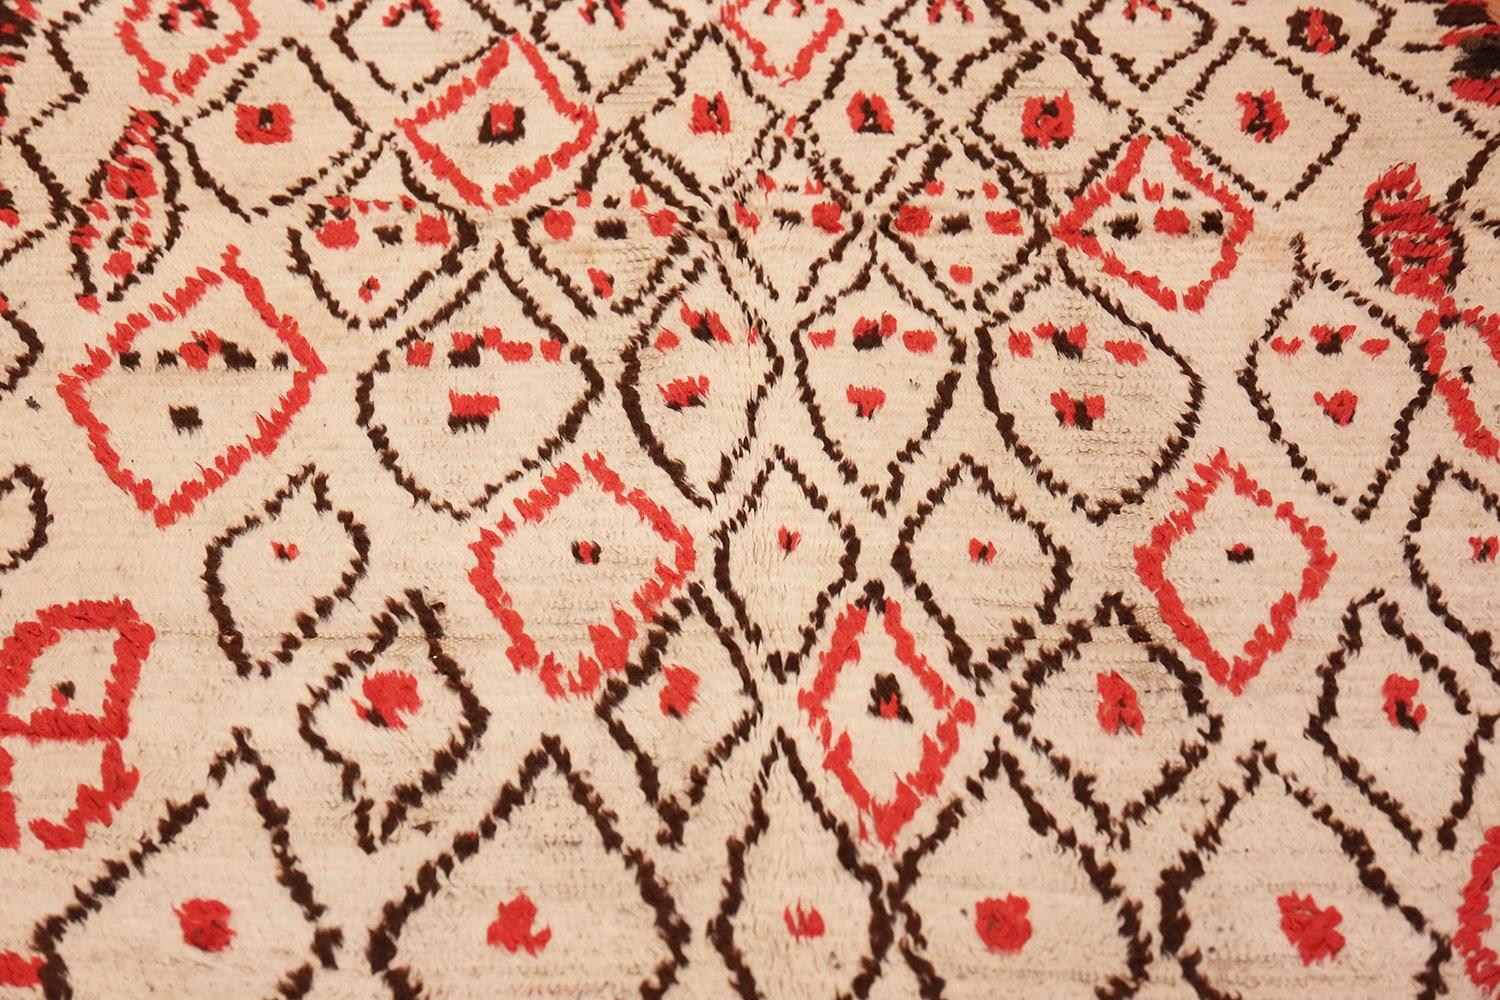 Rare White and Red Vintage Moroccan Carpet, Origin: Morocco, Circa: Late 20th Century - Size: 4 ft 5 in x 10 ft 9 in (1.35 m x 3.28 m).